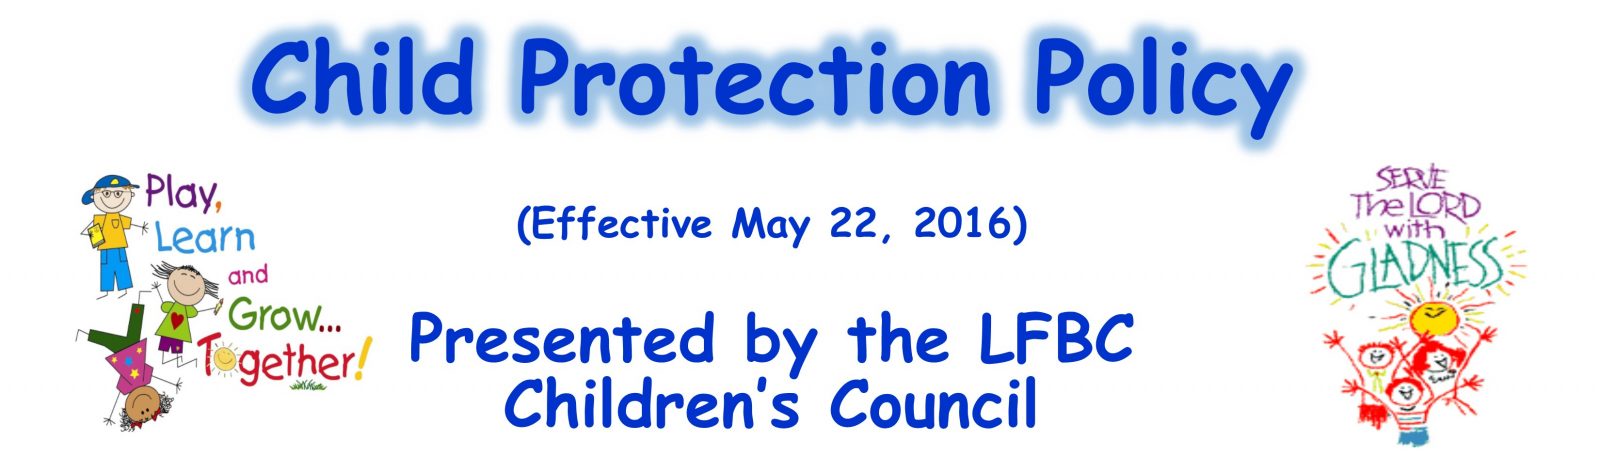 ChildProtectionPolicyHeader